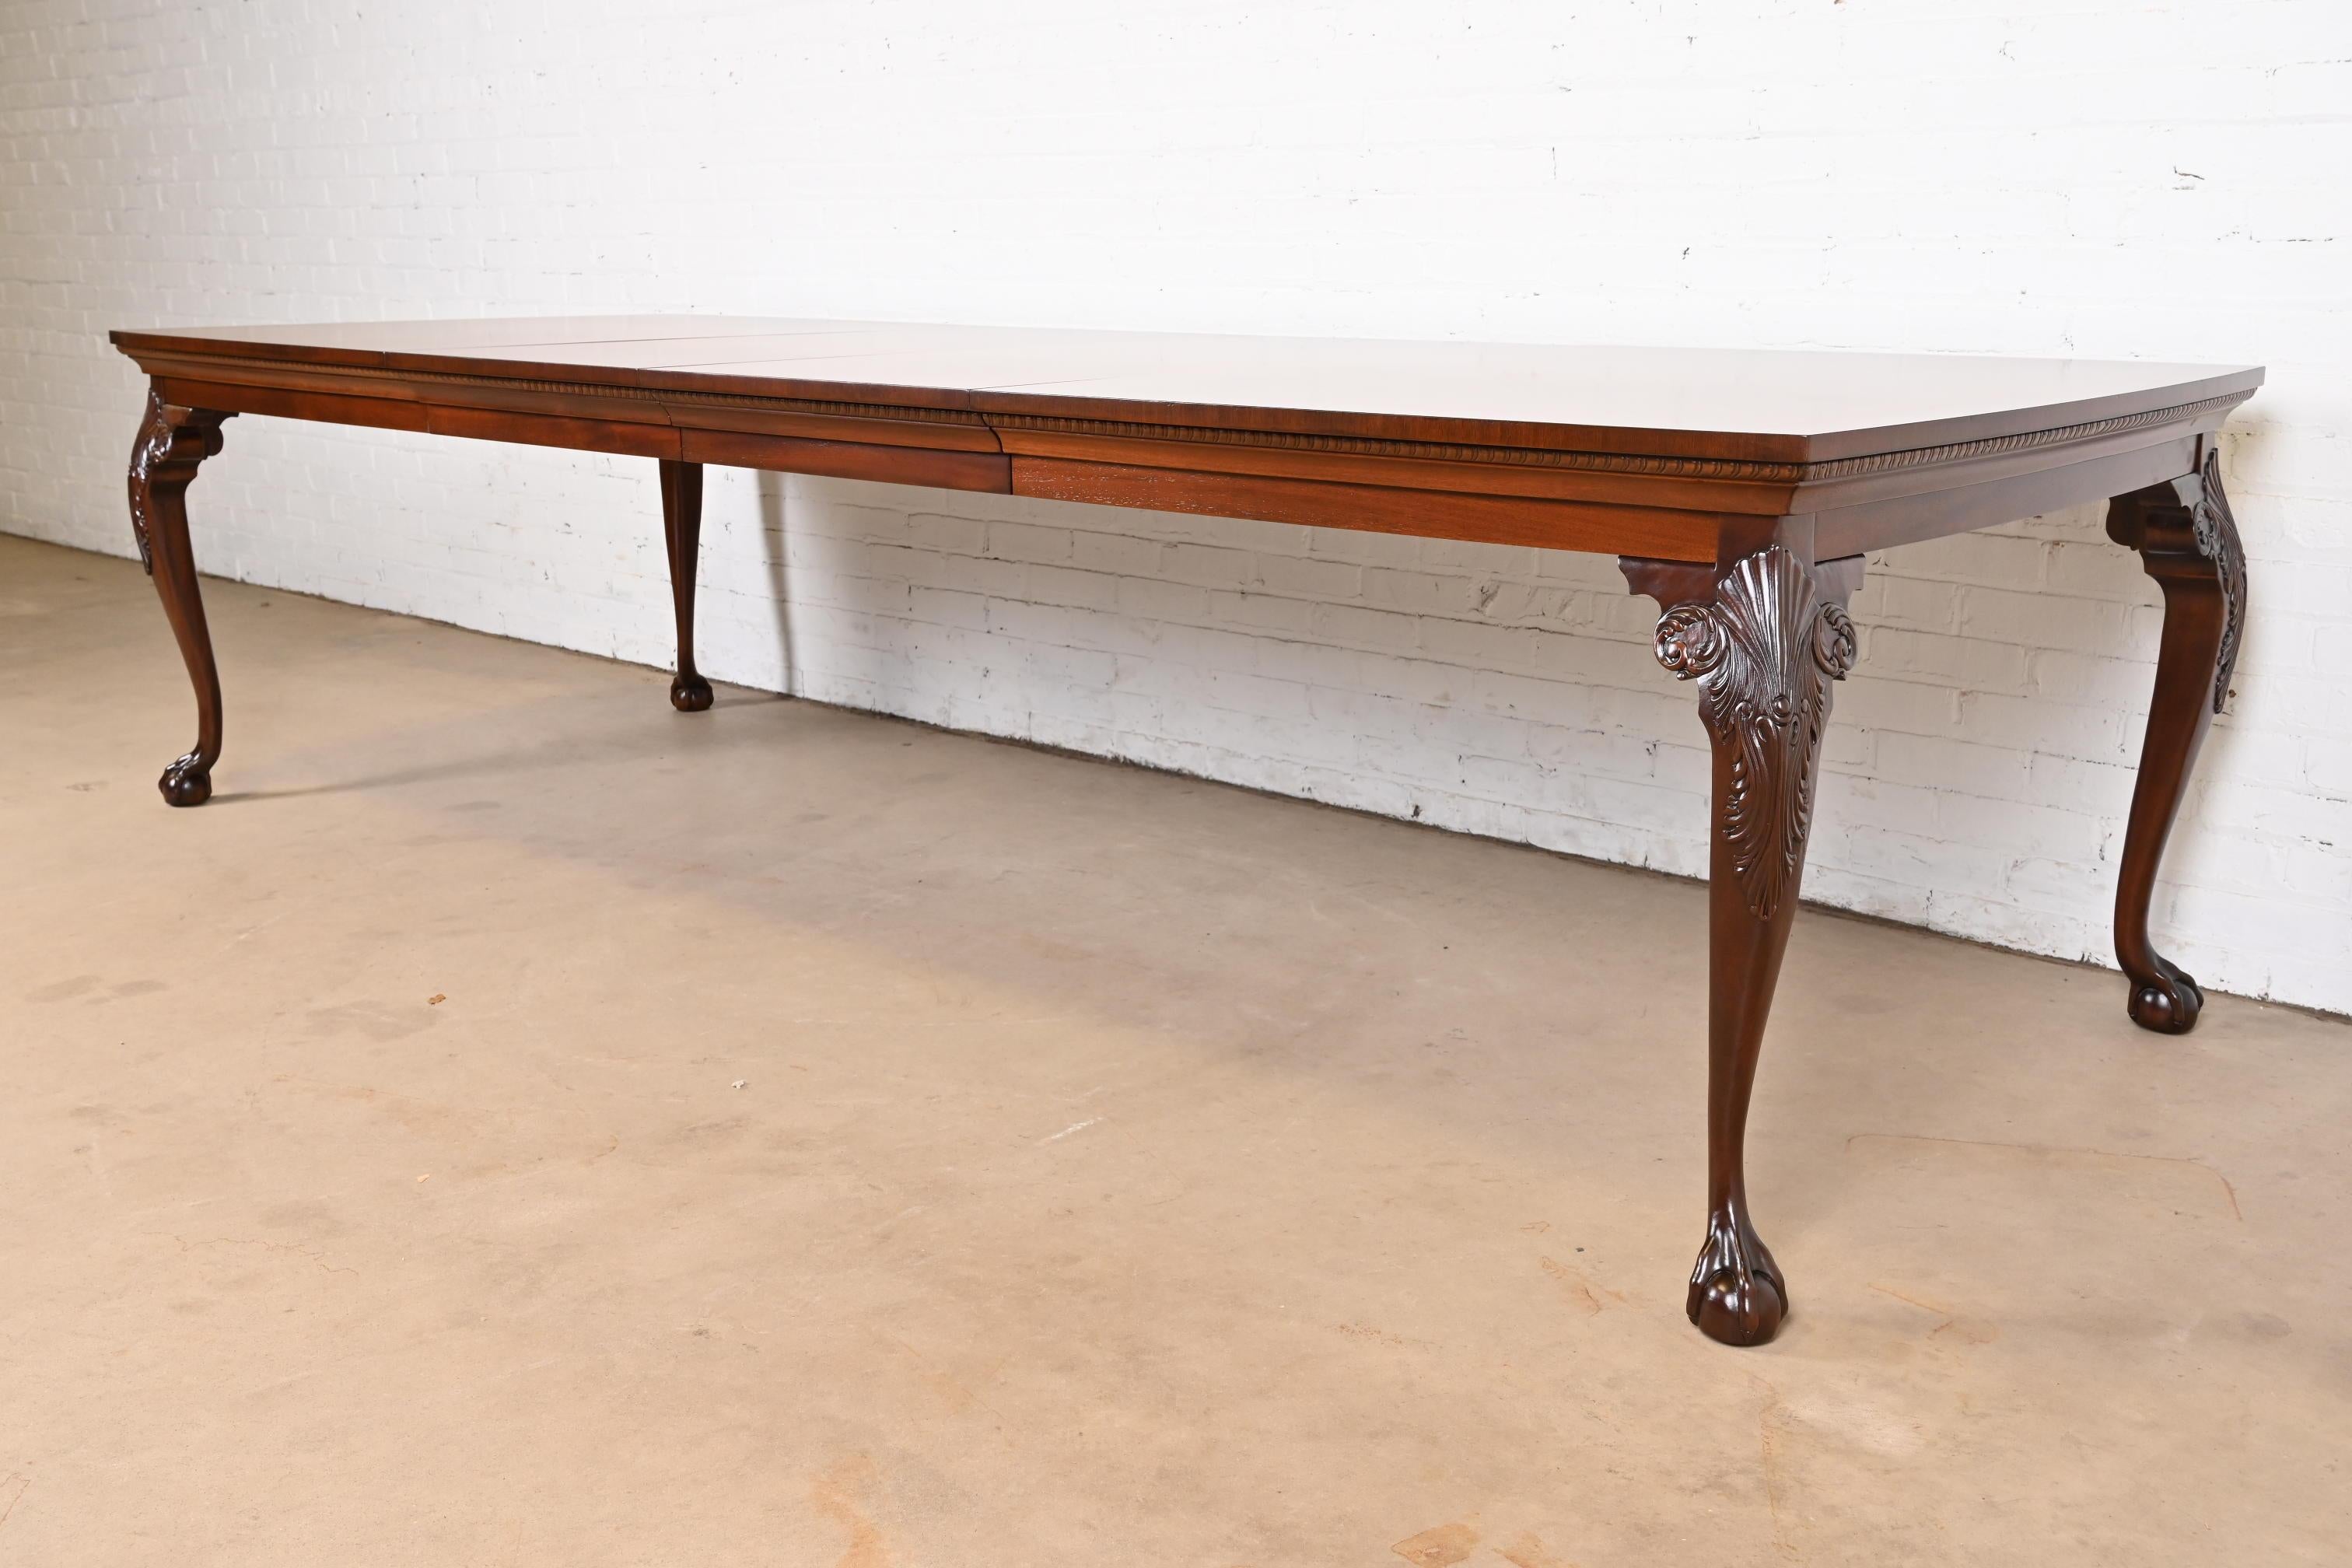 Henredon Chippendale Mahogany and Inlaid Burl Wood Extension Dining Table In Good Condition For Sale In South Bend, IN